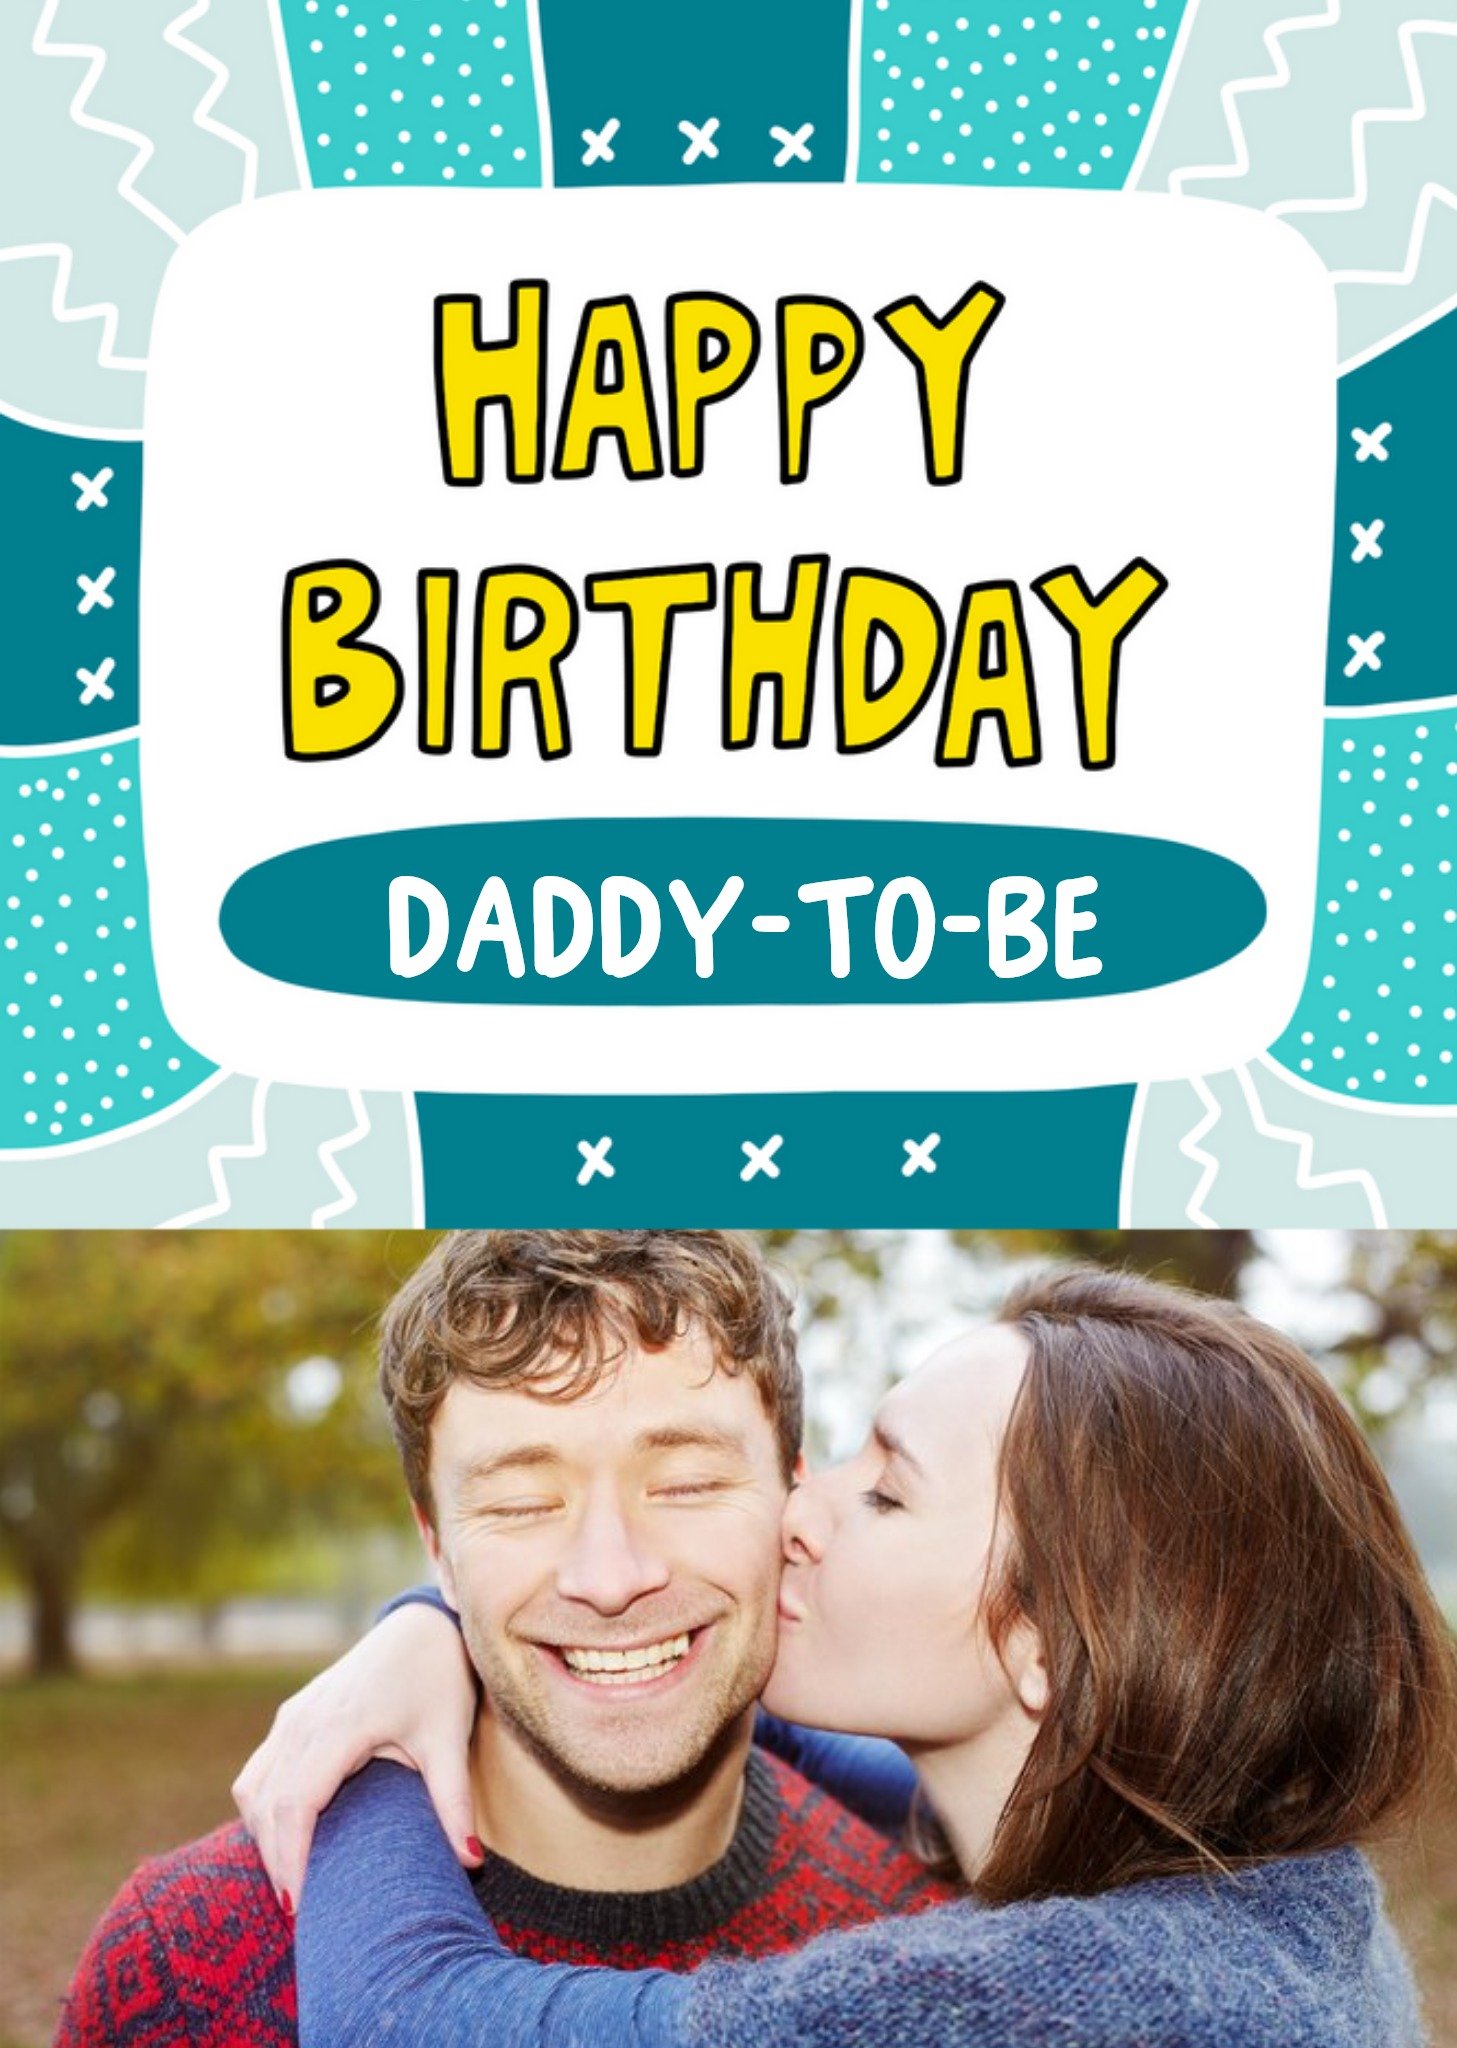 Moonpig Illustrated Teal Patchwork Daddy-To-Be Photo Upload Birthday Card Ecard